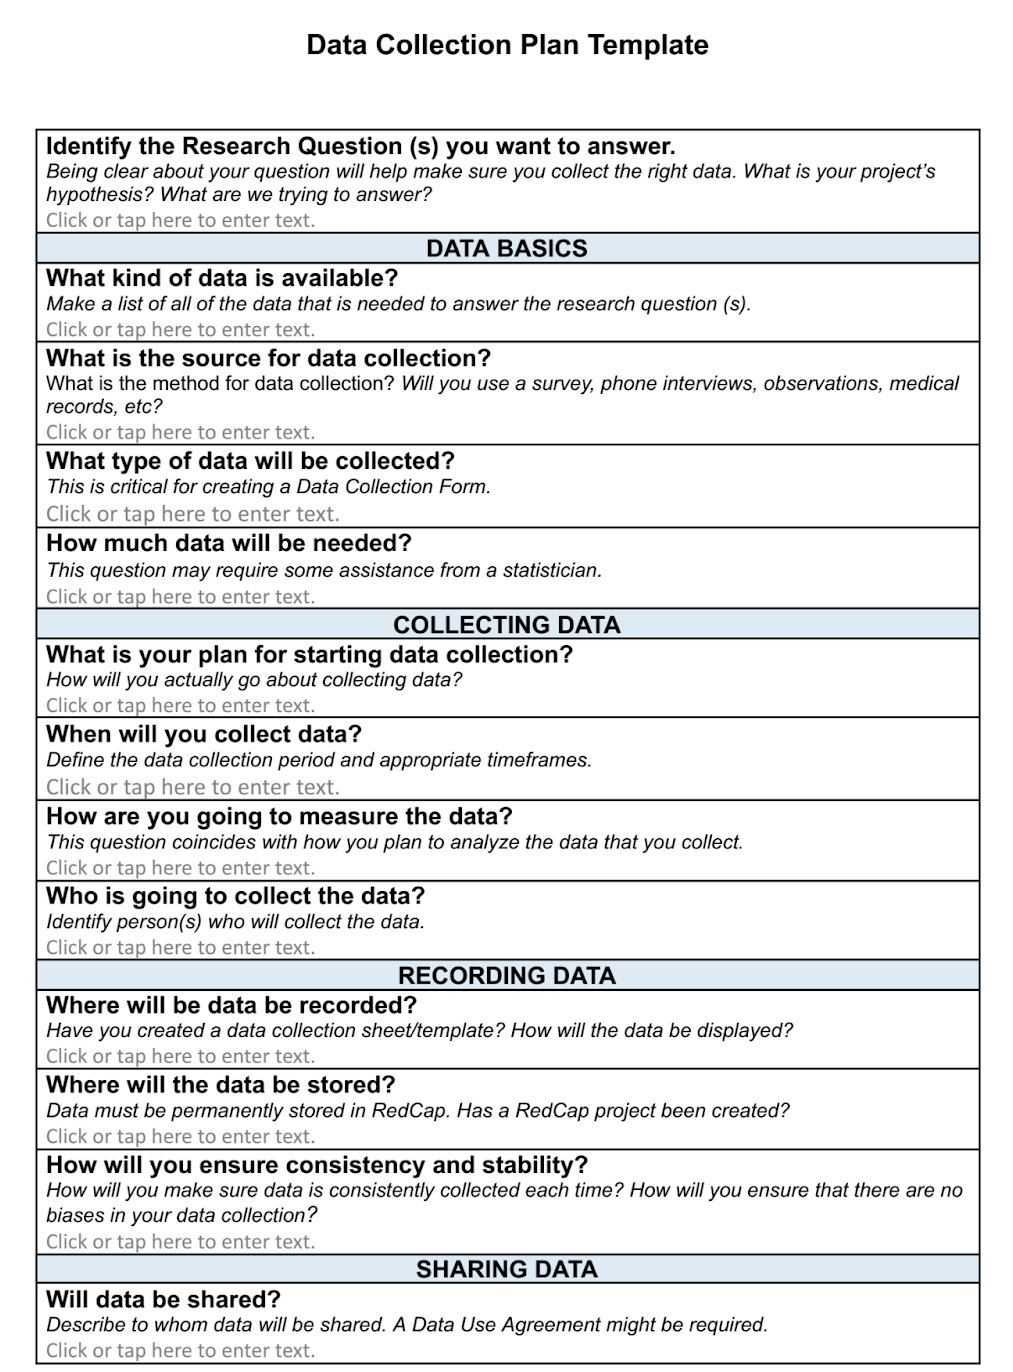 Data collection plan template for a clinical trial.